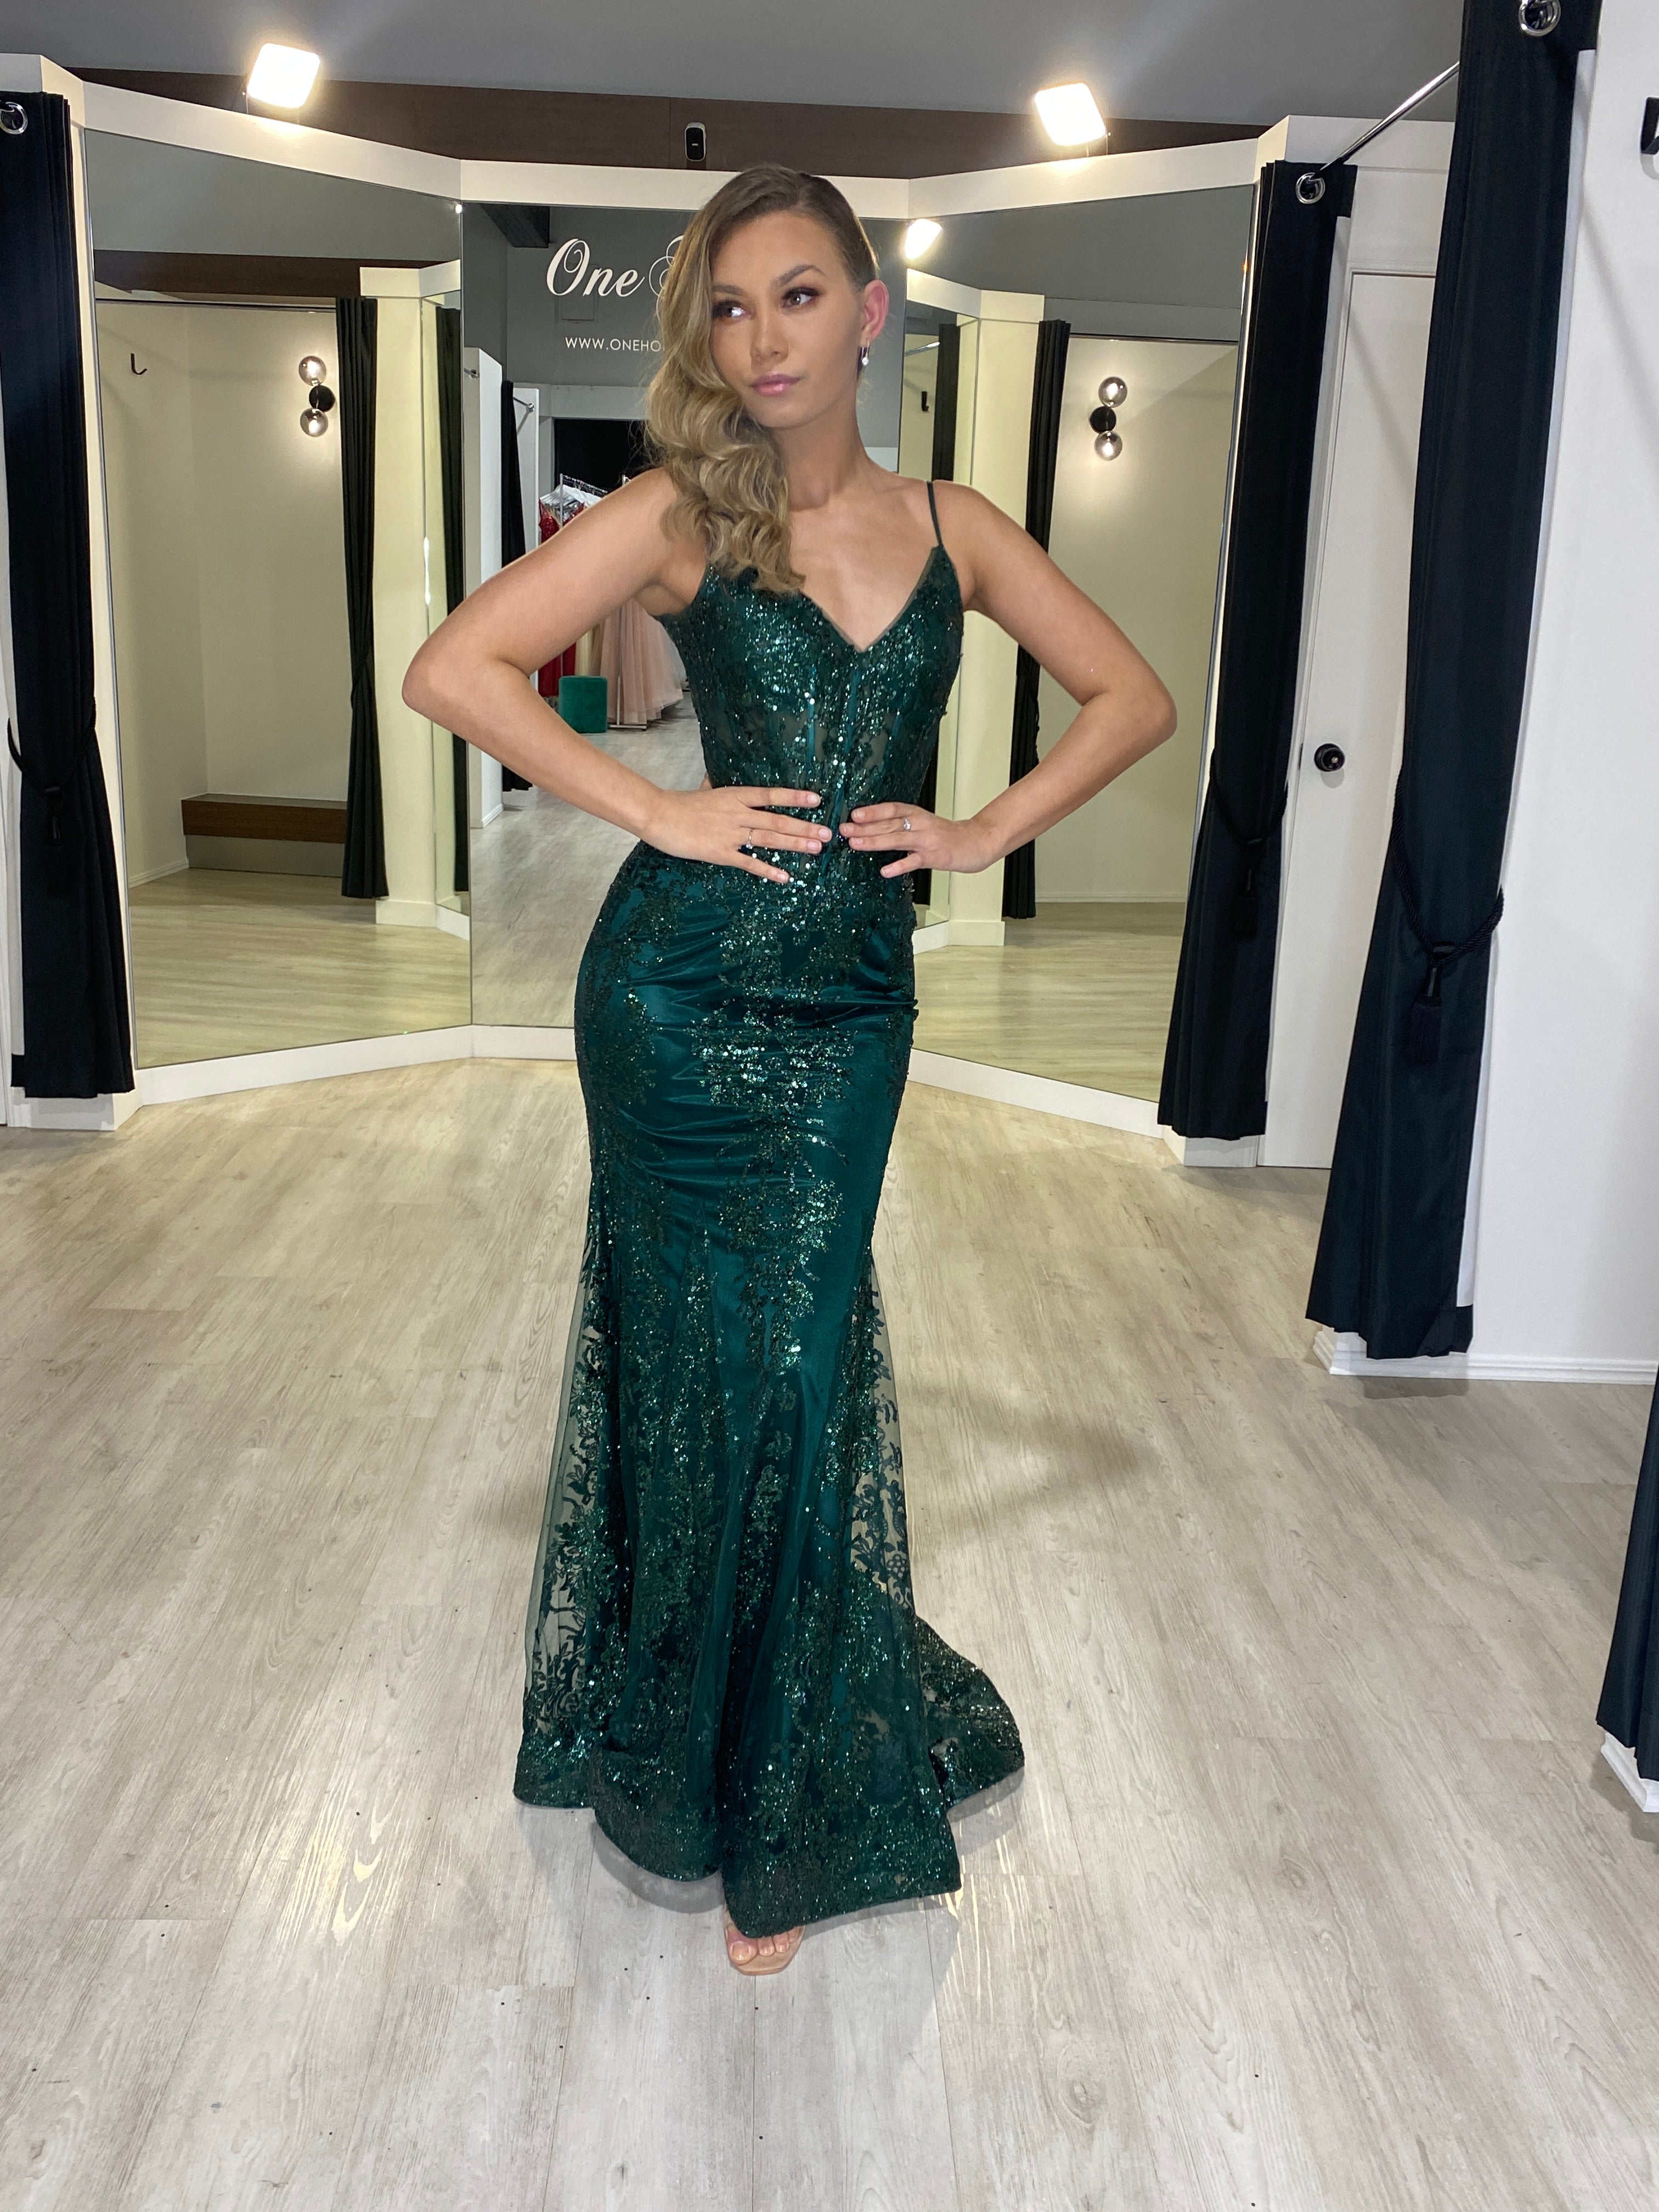 Honey Couture CAROLE Emerald Green Sequin Corset Mermaid Formal Gown Dress